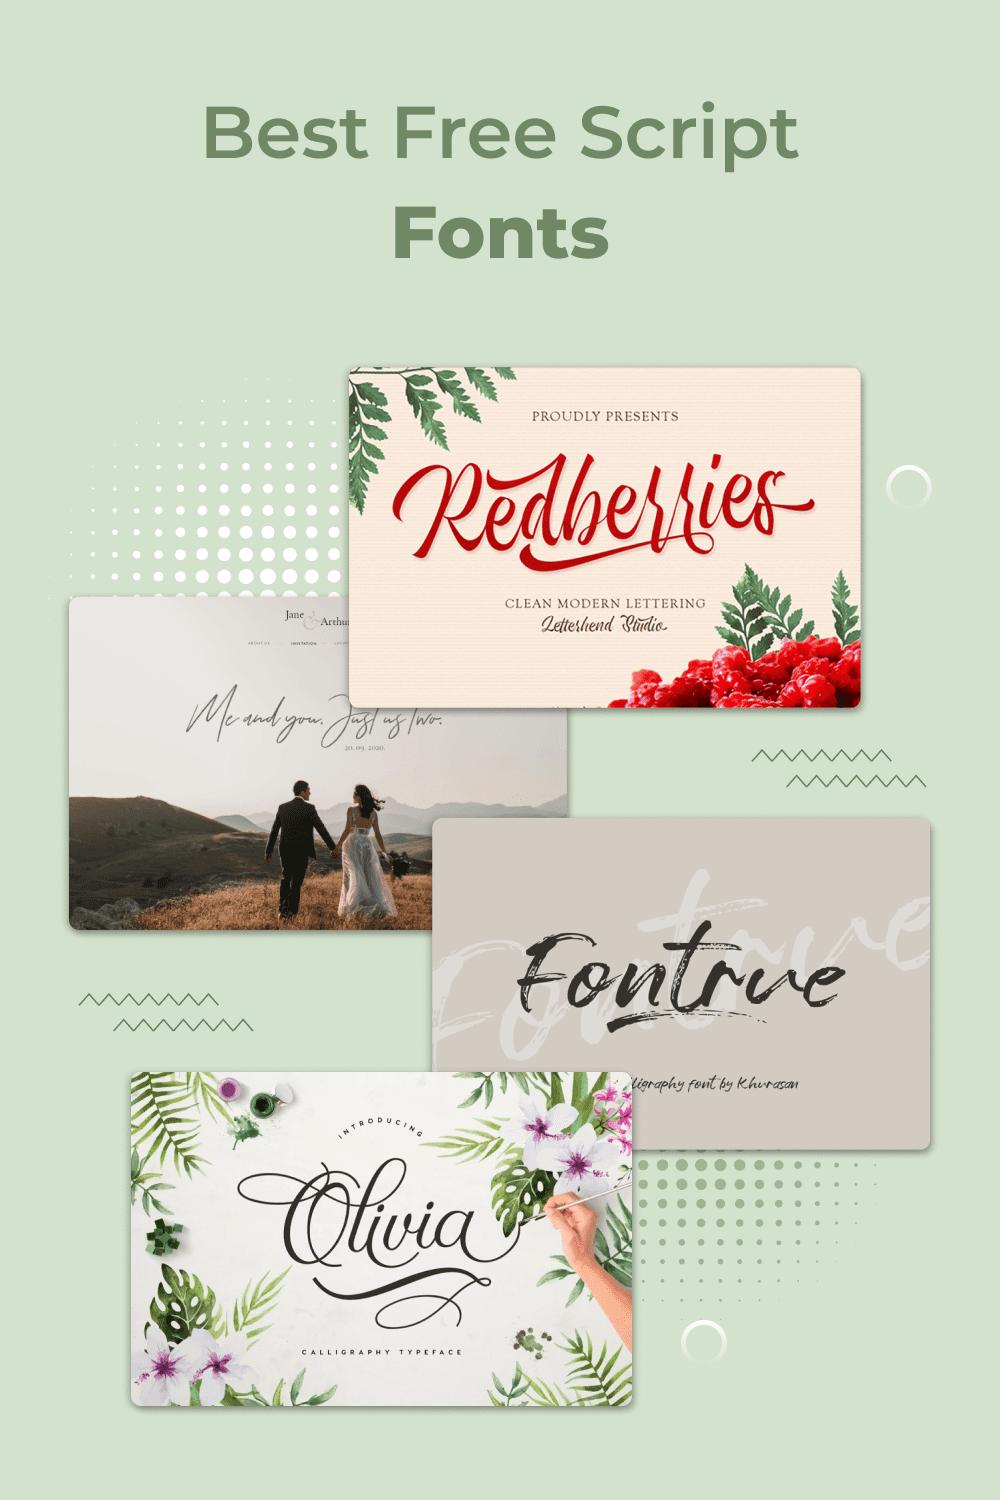 70 best free script fonts for top notch designs pinterst collage 17.